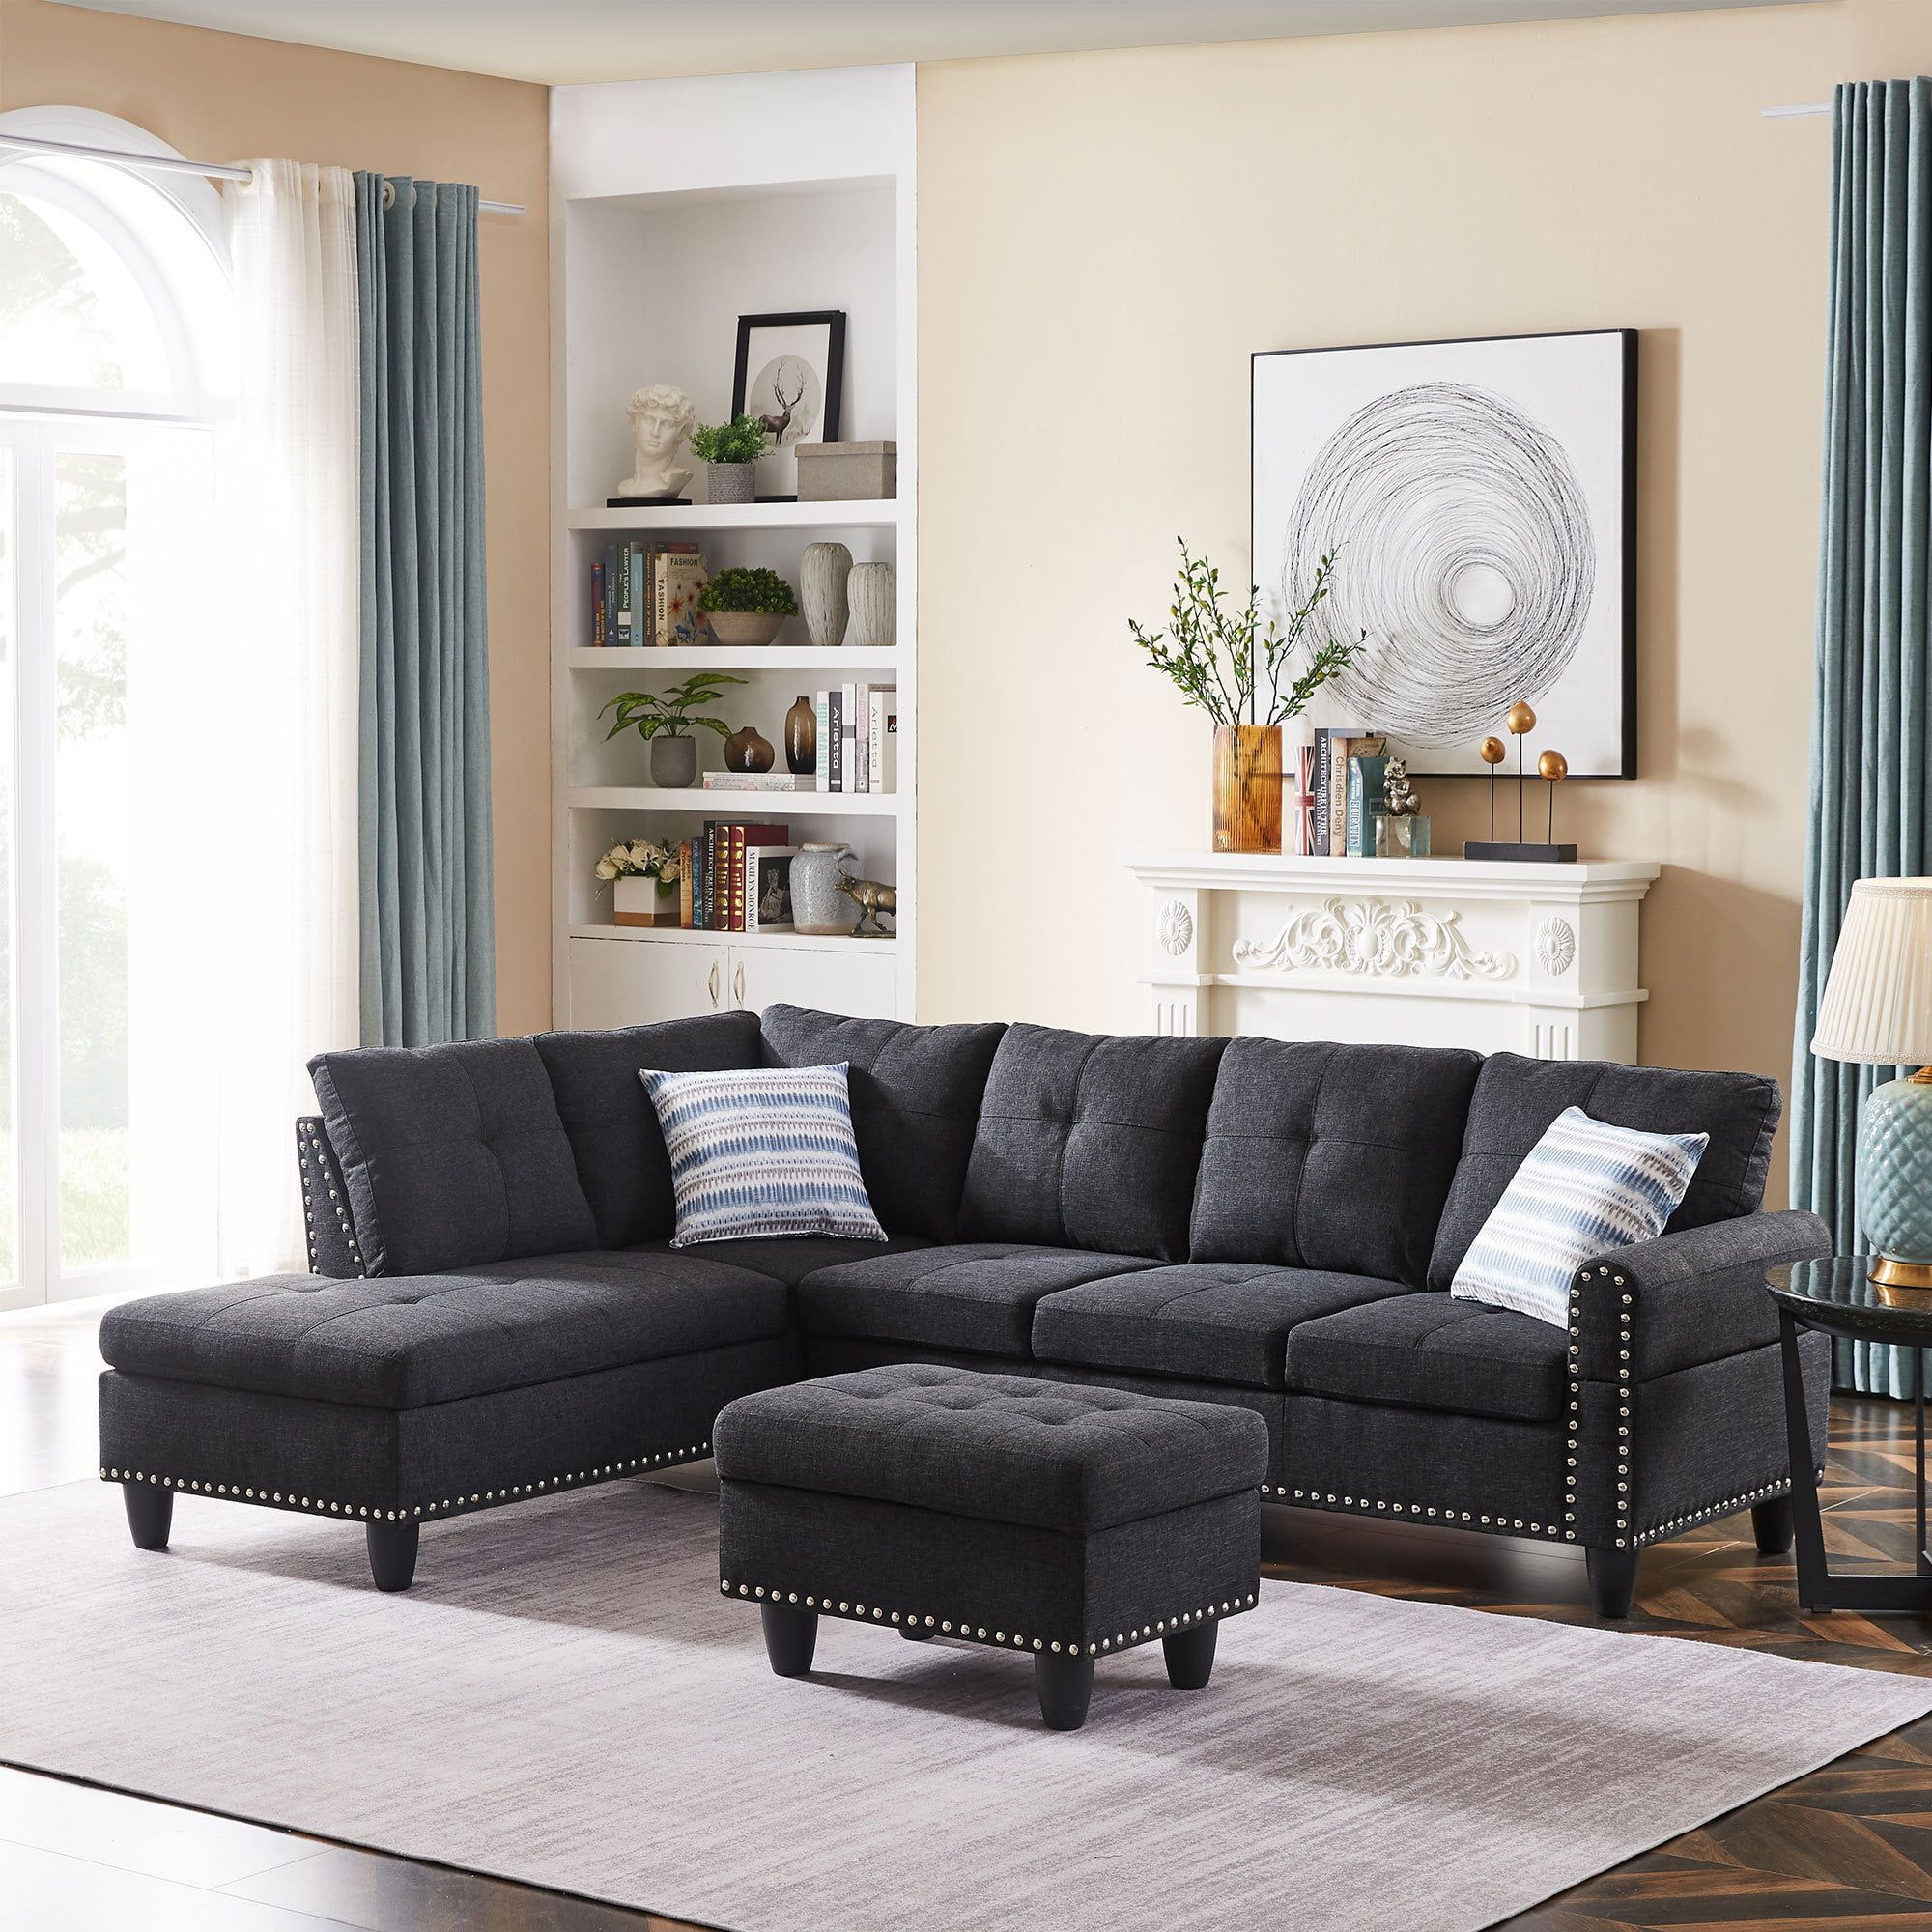 Aukfa L Shaped Sectional Couch Set With Ottoman, Sofas For Living Room –  Walmart With Sofas With Ottomans (View 11 of 15)